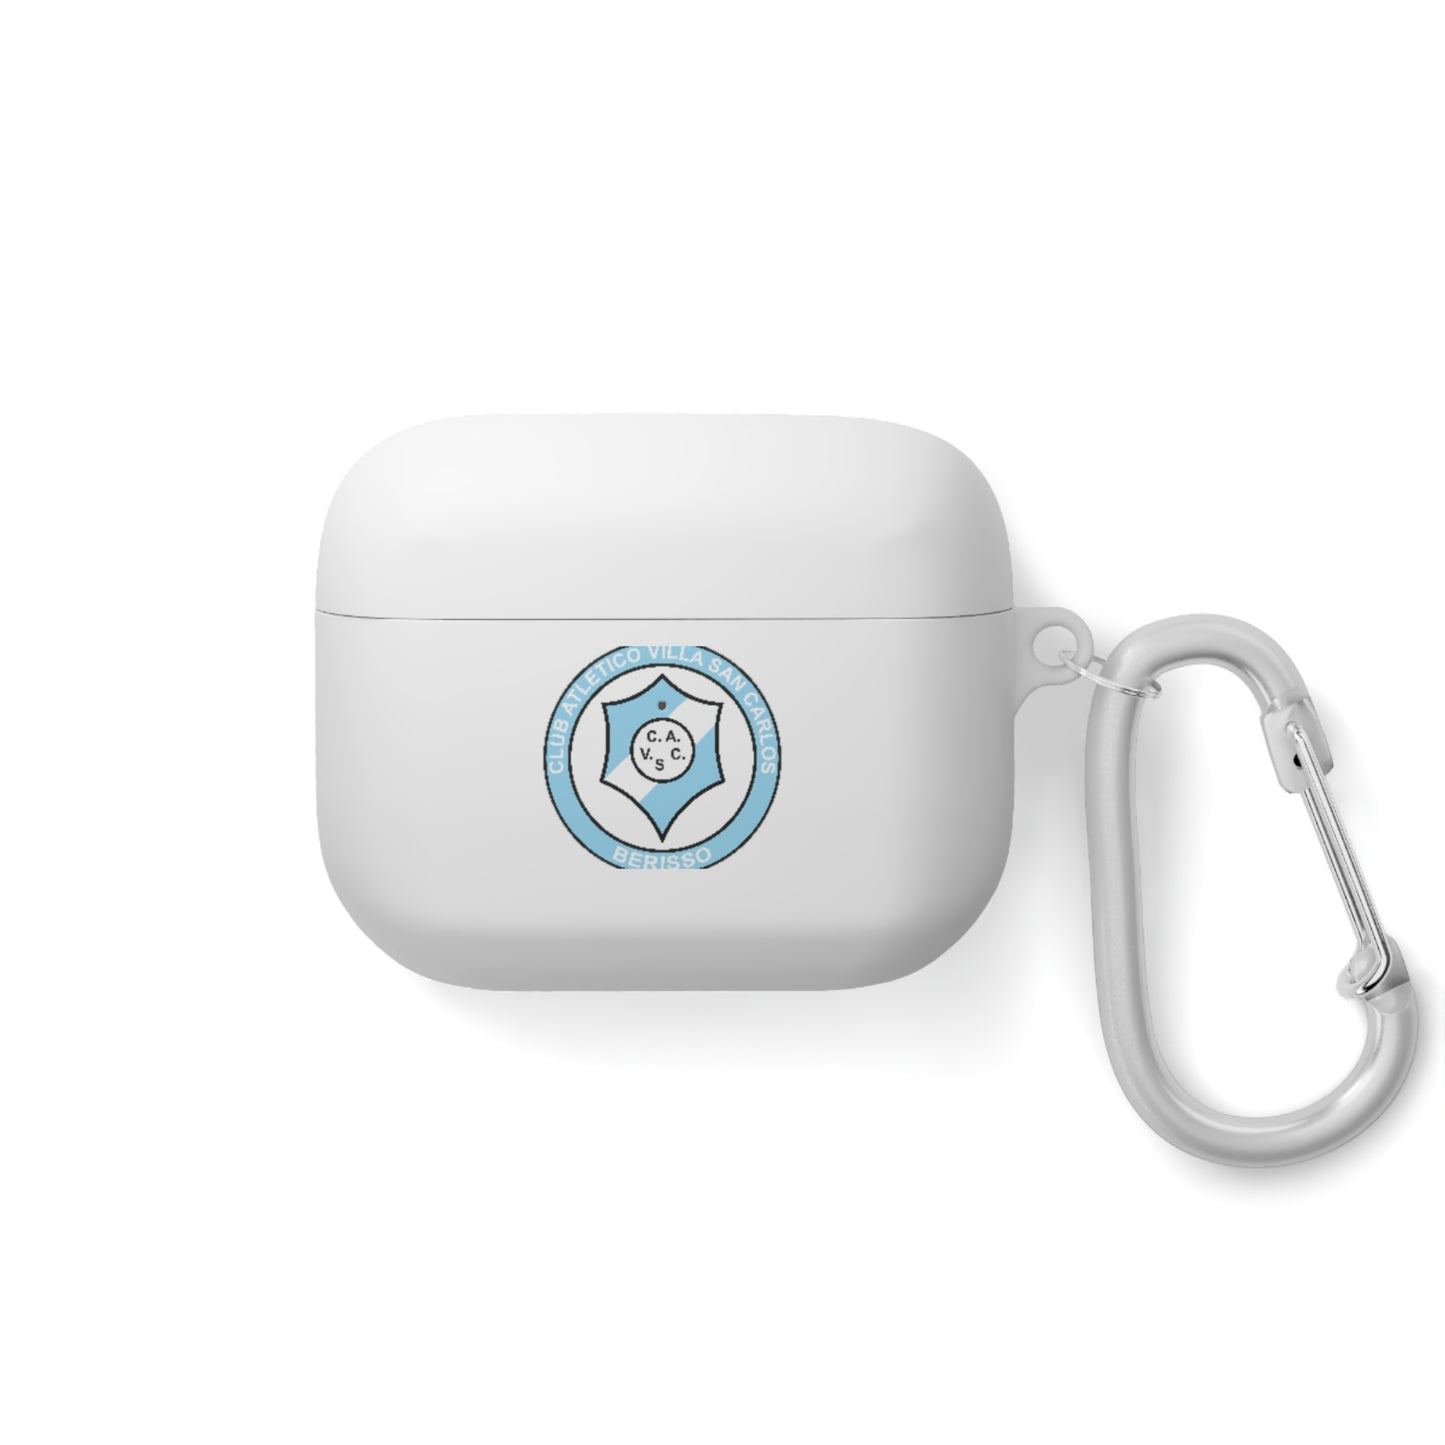 Villa San Carlos AirPods and AirPods Pro Case Cover